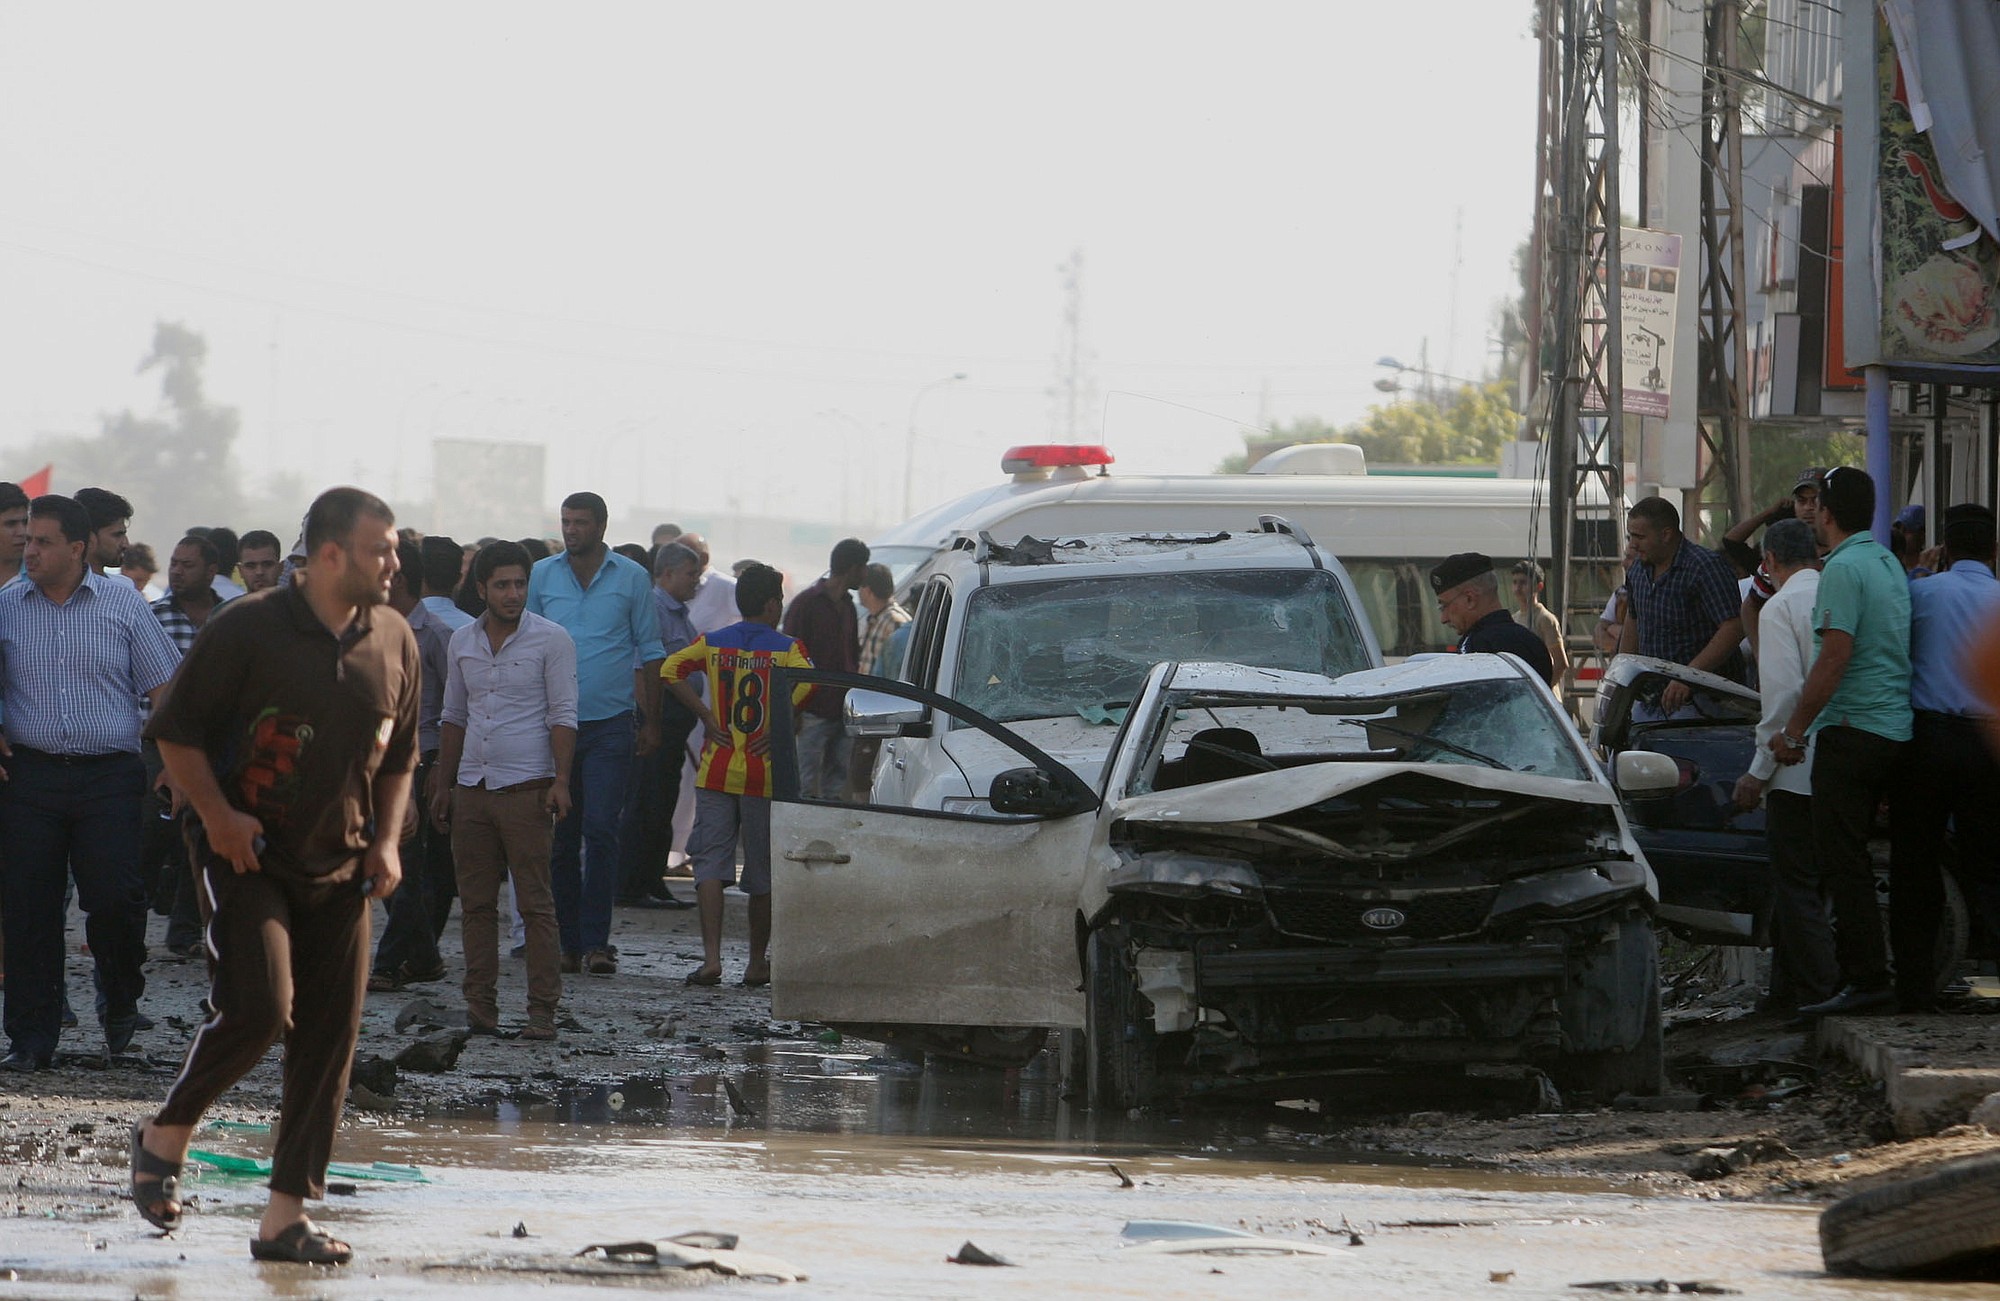 Associated Press
People gather Monday at the scene of a car bomb explosion in which people were killed and wounded in a commercial area in the southern Shiite holy city of Karbala, 55 miles south of Baghdad.